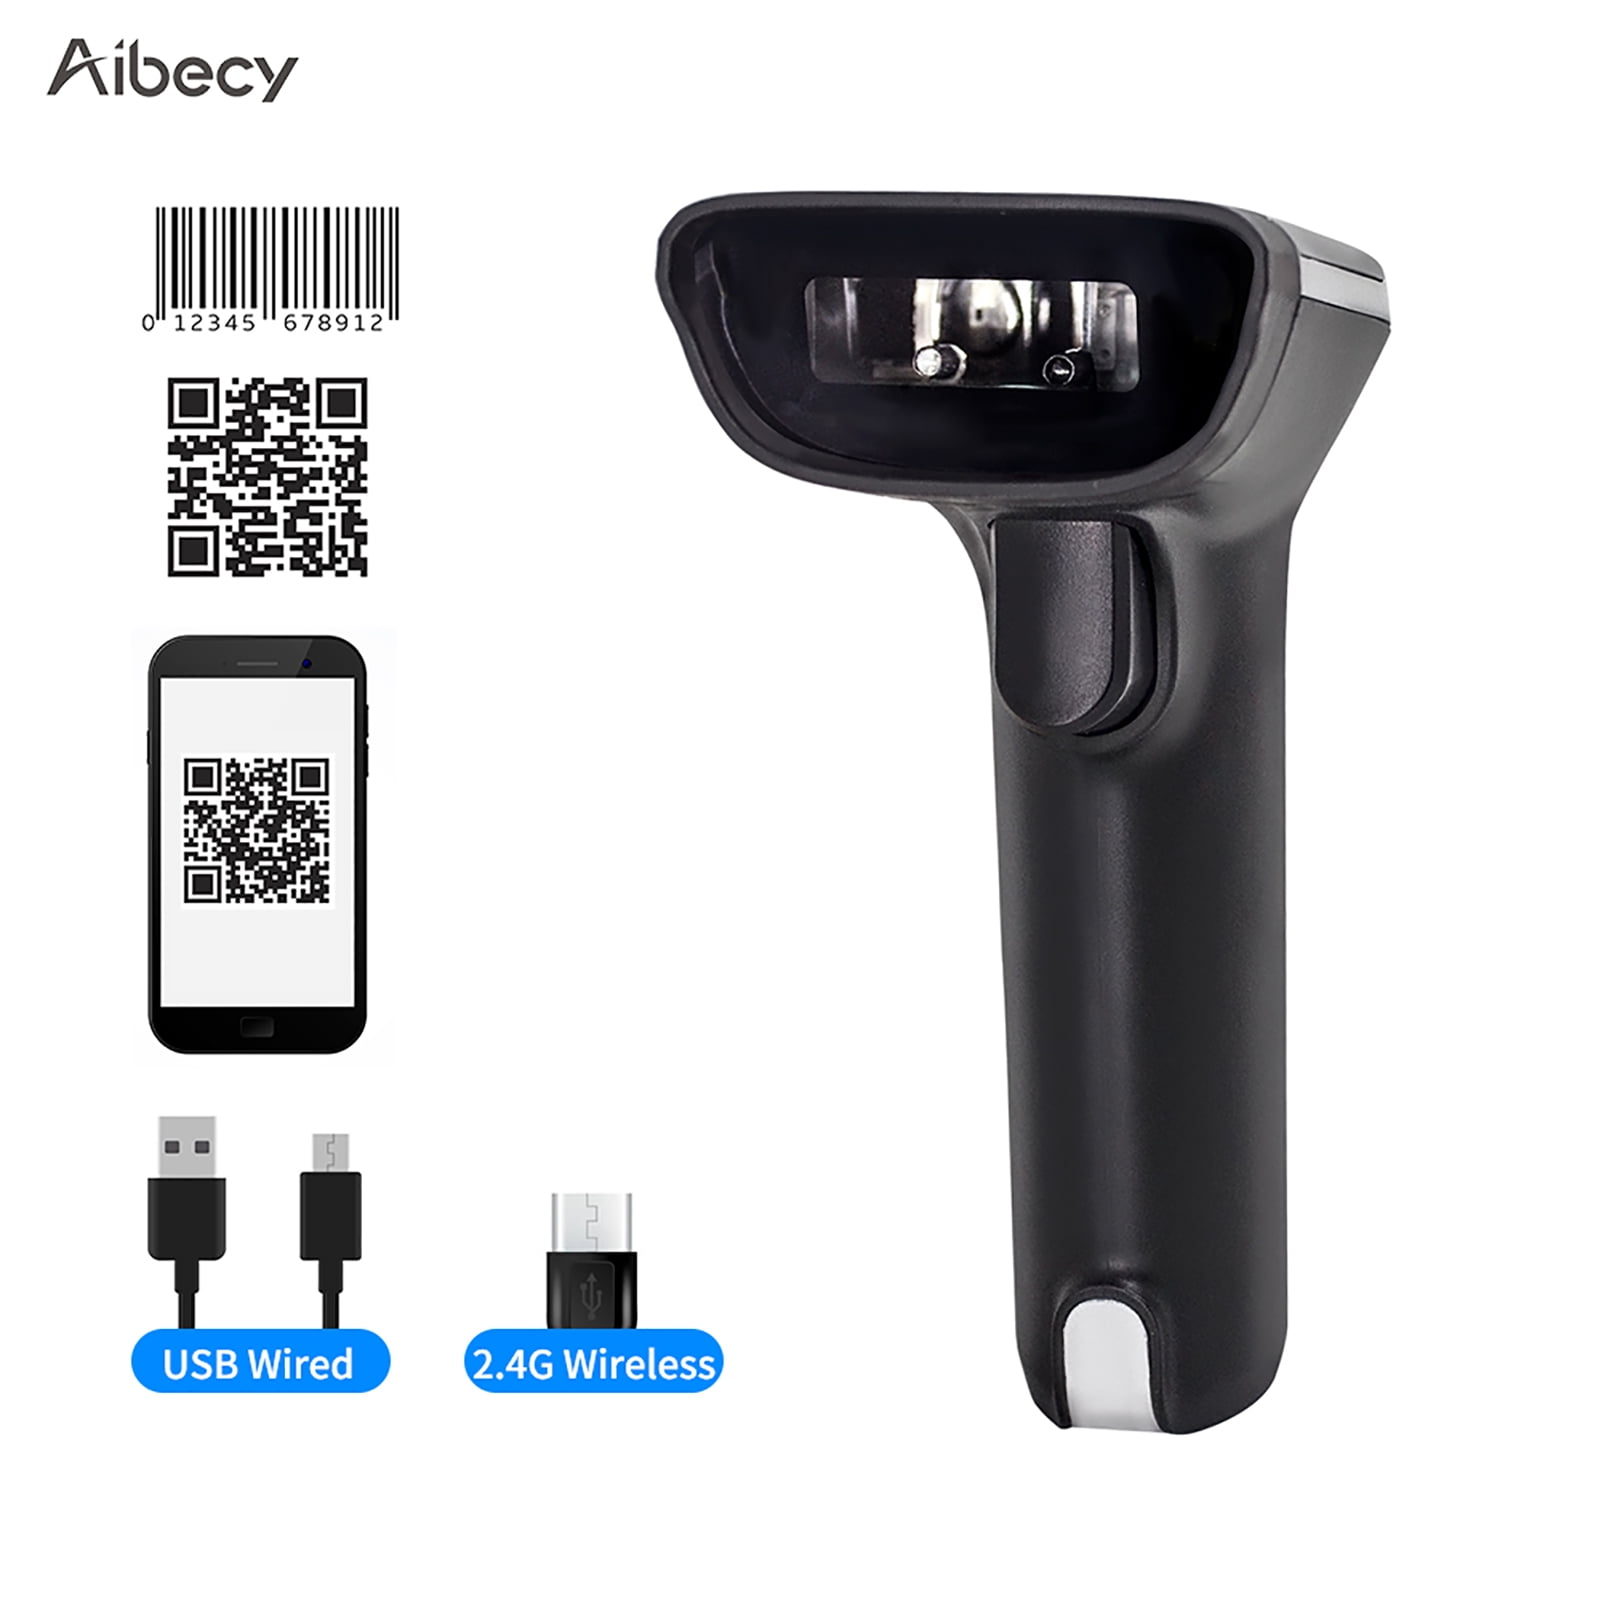 BAOSHARE Wireless Barcode Scanner with USB Cradle Receiver Charging Base WX-B-2D 1Pack 433MHz Handheld 1D/2D/QR Cordless Barcode Reader UP to 1000Ft Transmission Range